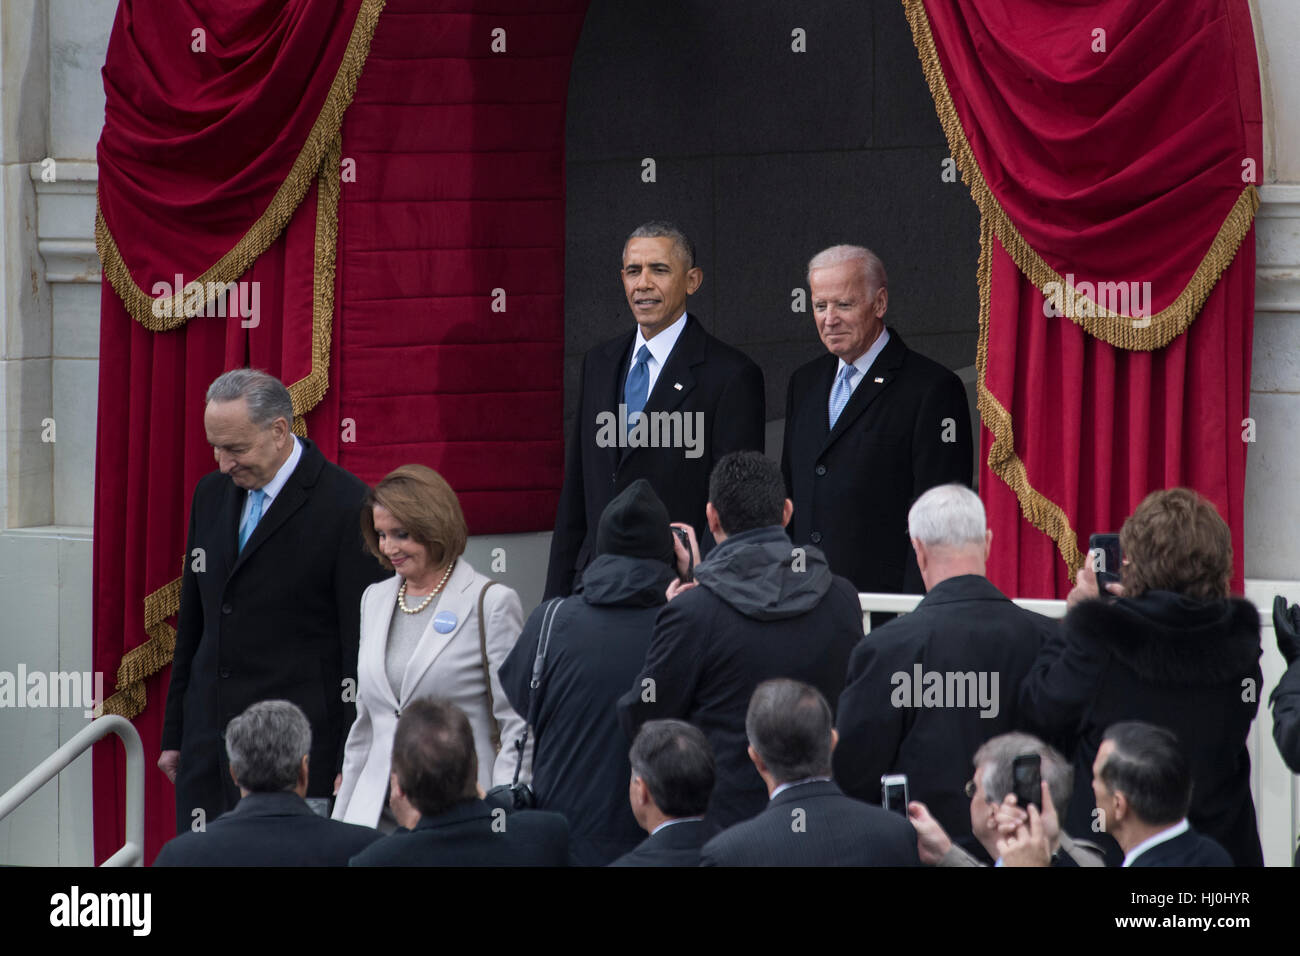 Washington, USA. 20th Jan, 2017. U.S. President Barak Obama and Vice President Joe Biden arrive at the East Front of the Capital for the Inauguration of President Elect Donald Trump to become the 45th President of the United States.  President of the United States on Jan. 20, 2017. Credit: charlie archambault/Alamy Live News Stock Photo